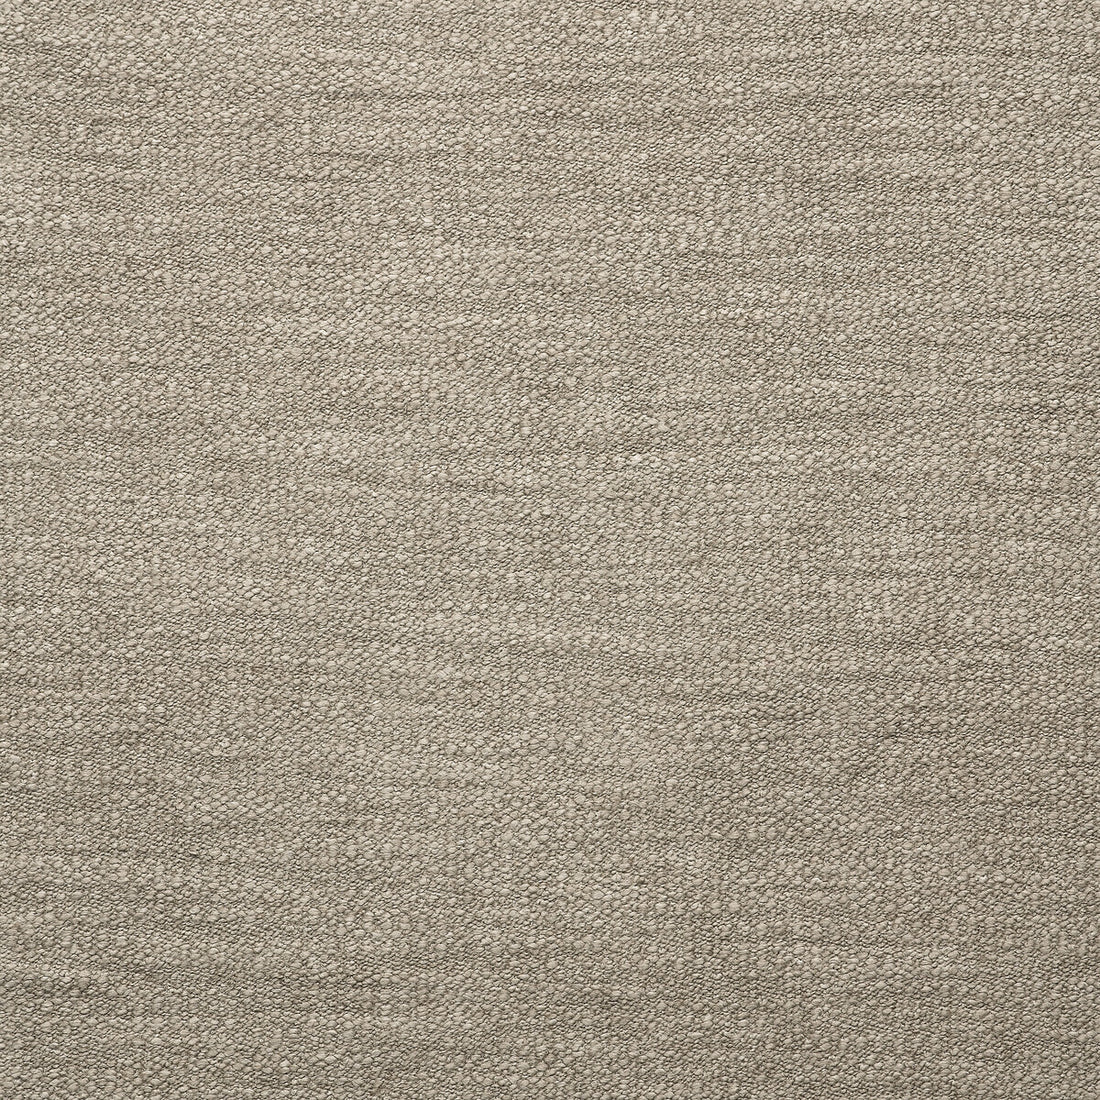 Poncho fabric in sand color - pattern AM100357.16.0 - by Kravet Couture in the Andrew Martin Condor collection